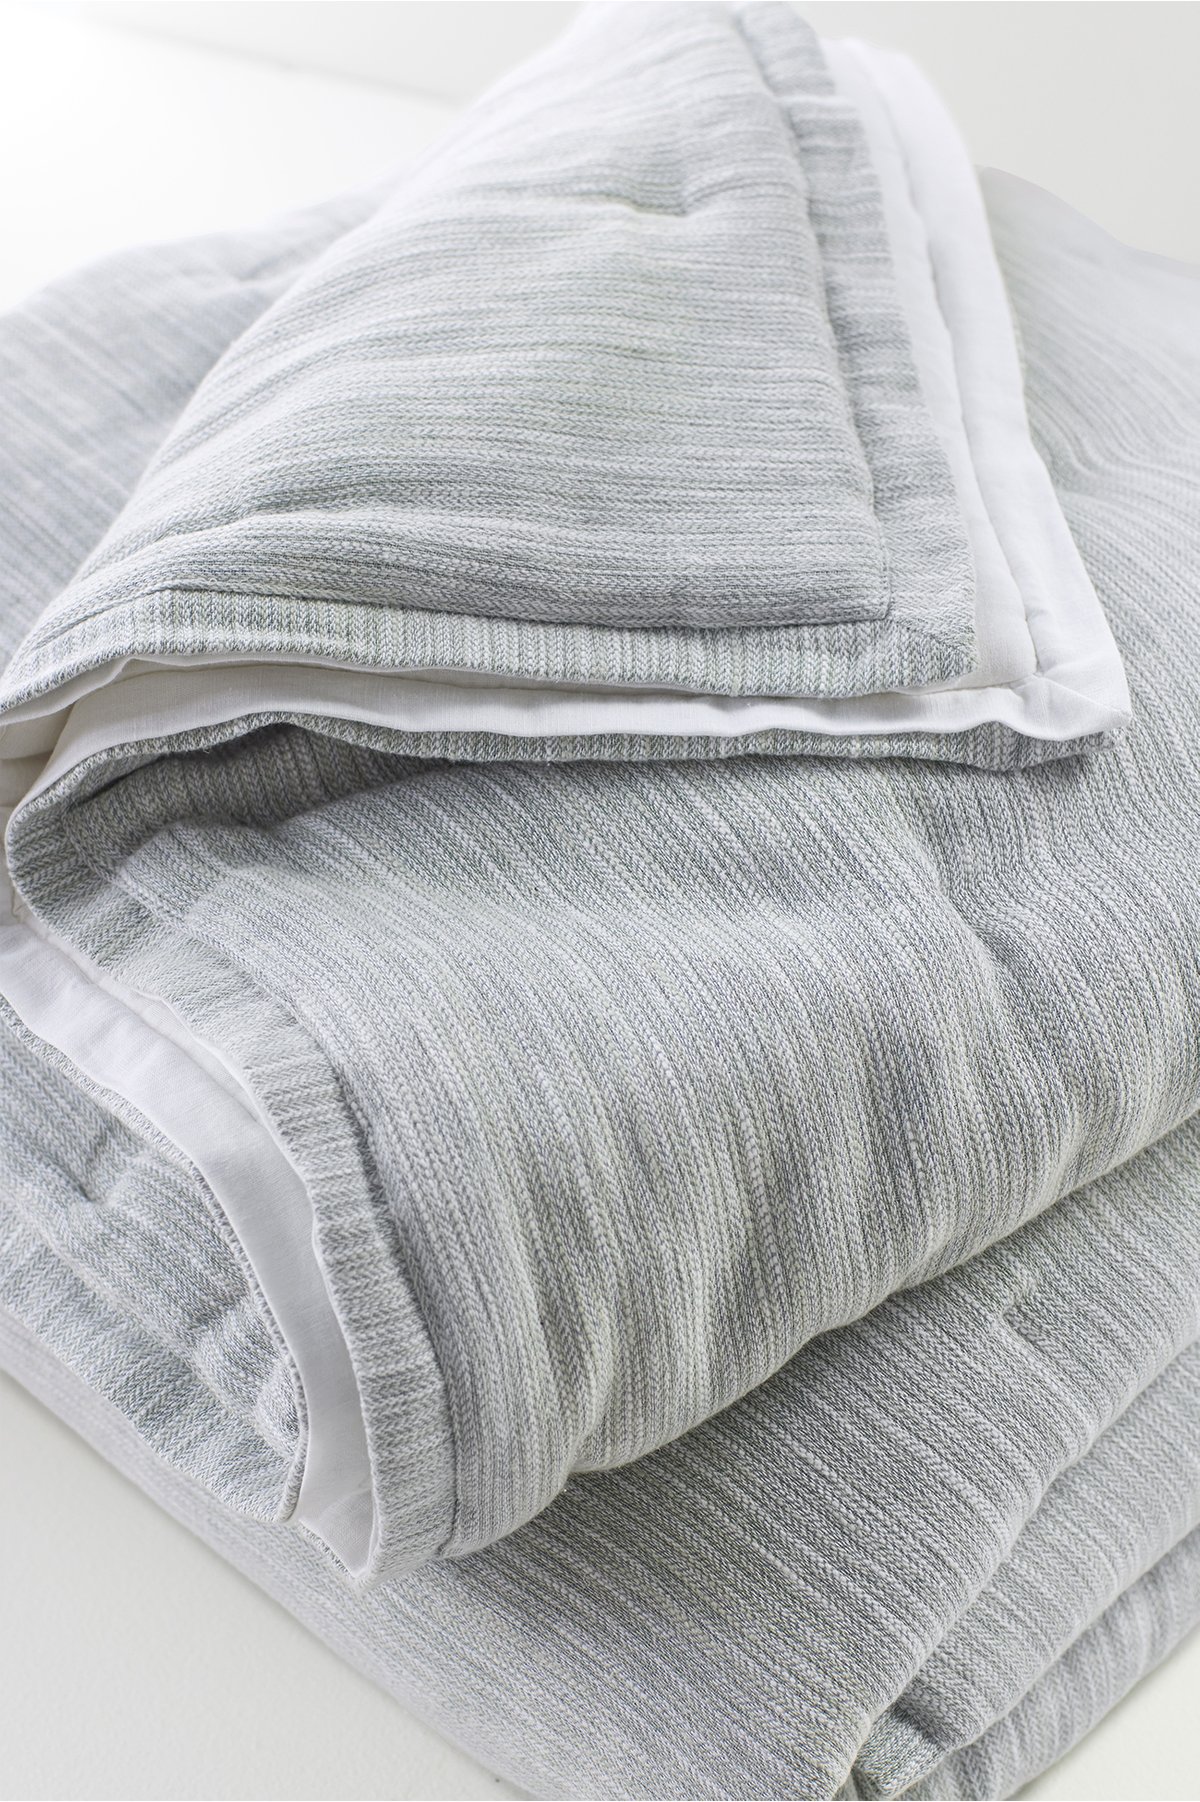 Evie Textured Comforter by Soft Surroundings, in S...